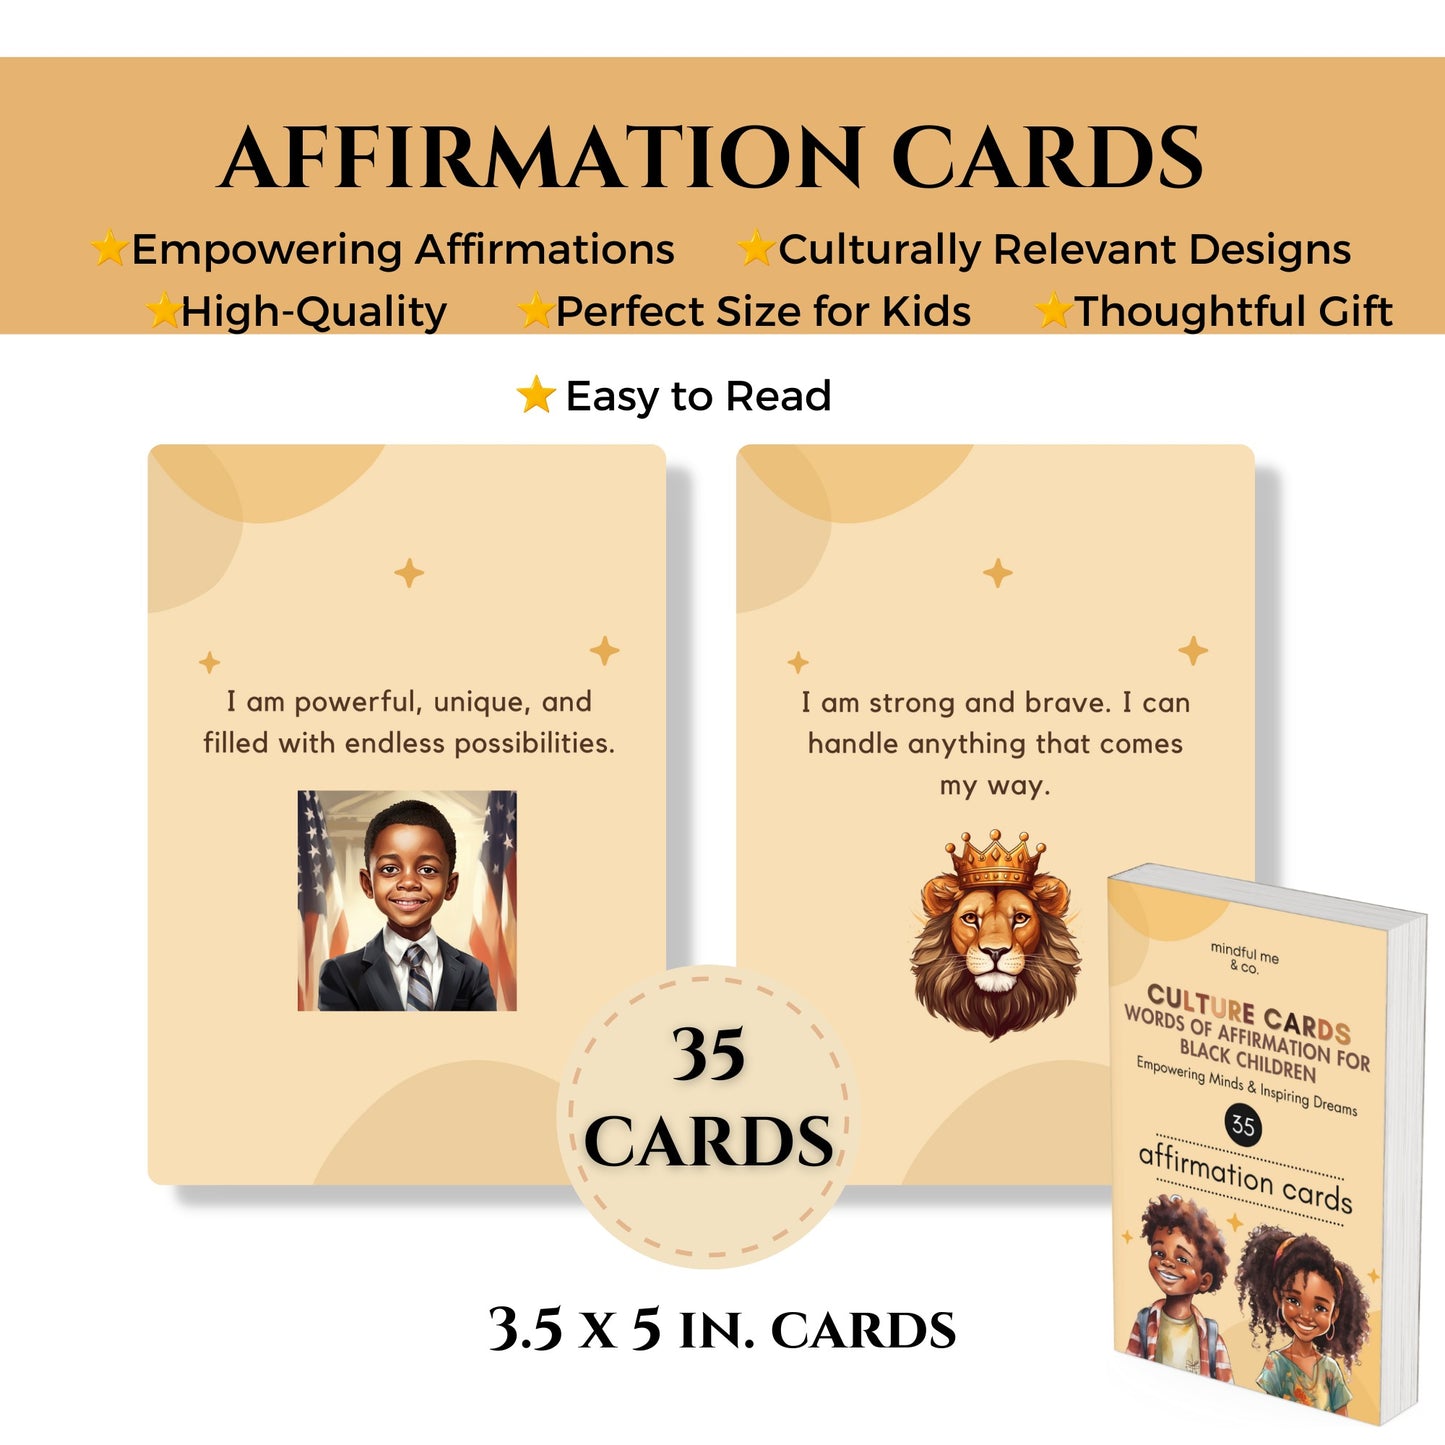 Affirmation Cards for Black Kids Girls Boys Children Affirmations Gifts Empower Confidence Card Daily Positive Black History Juneteenth 